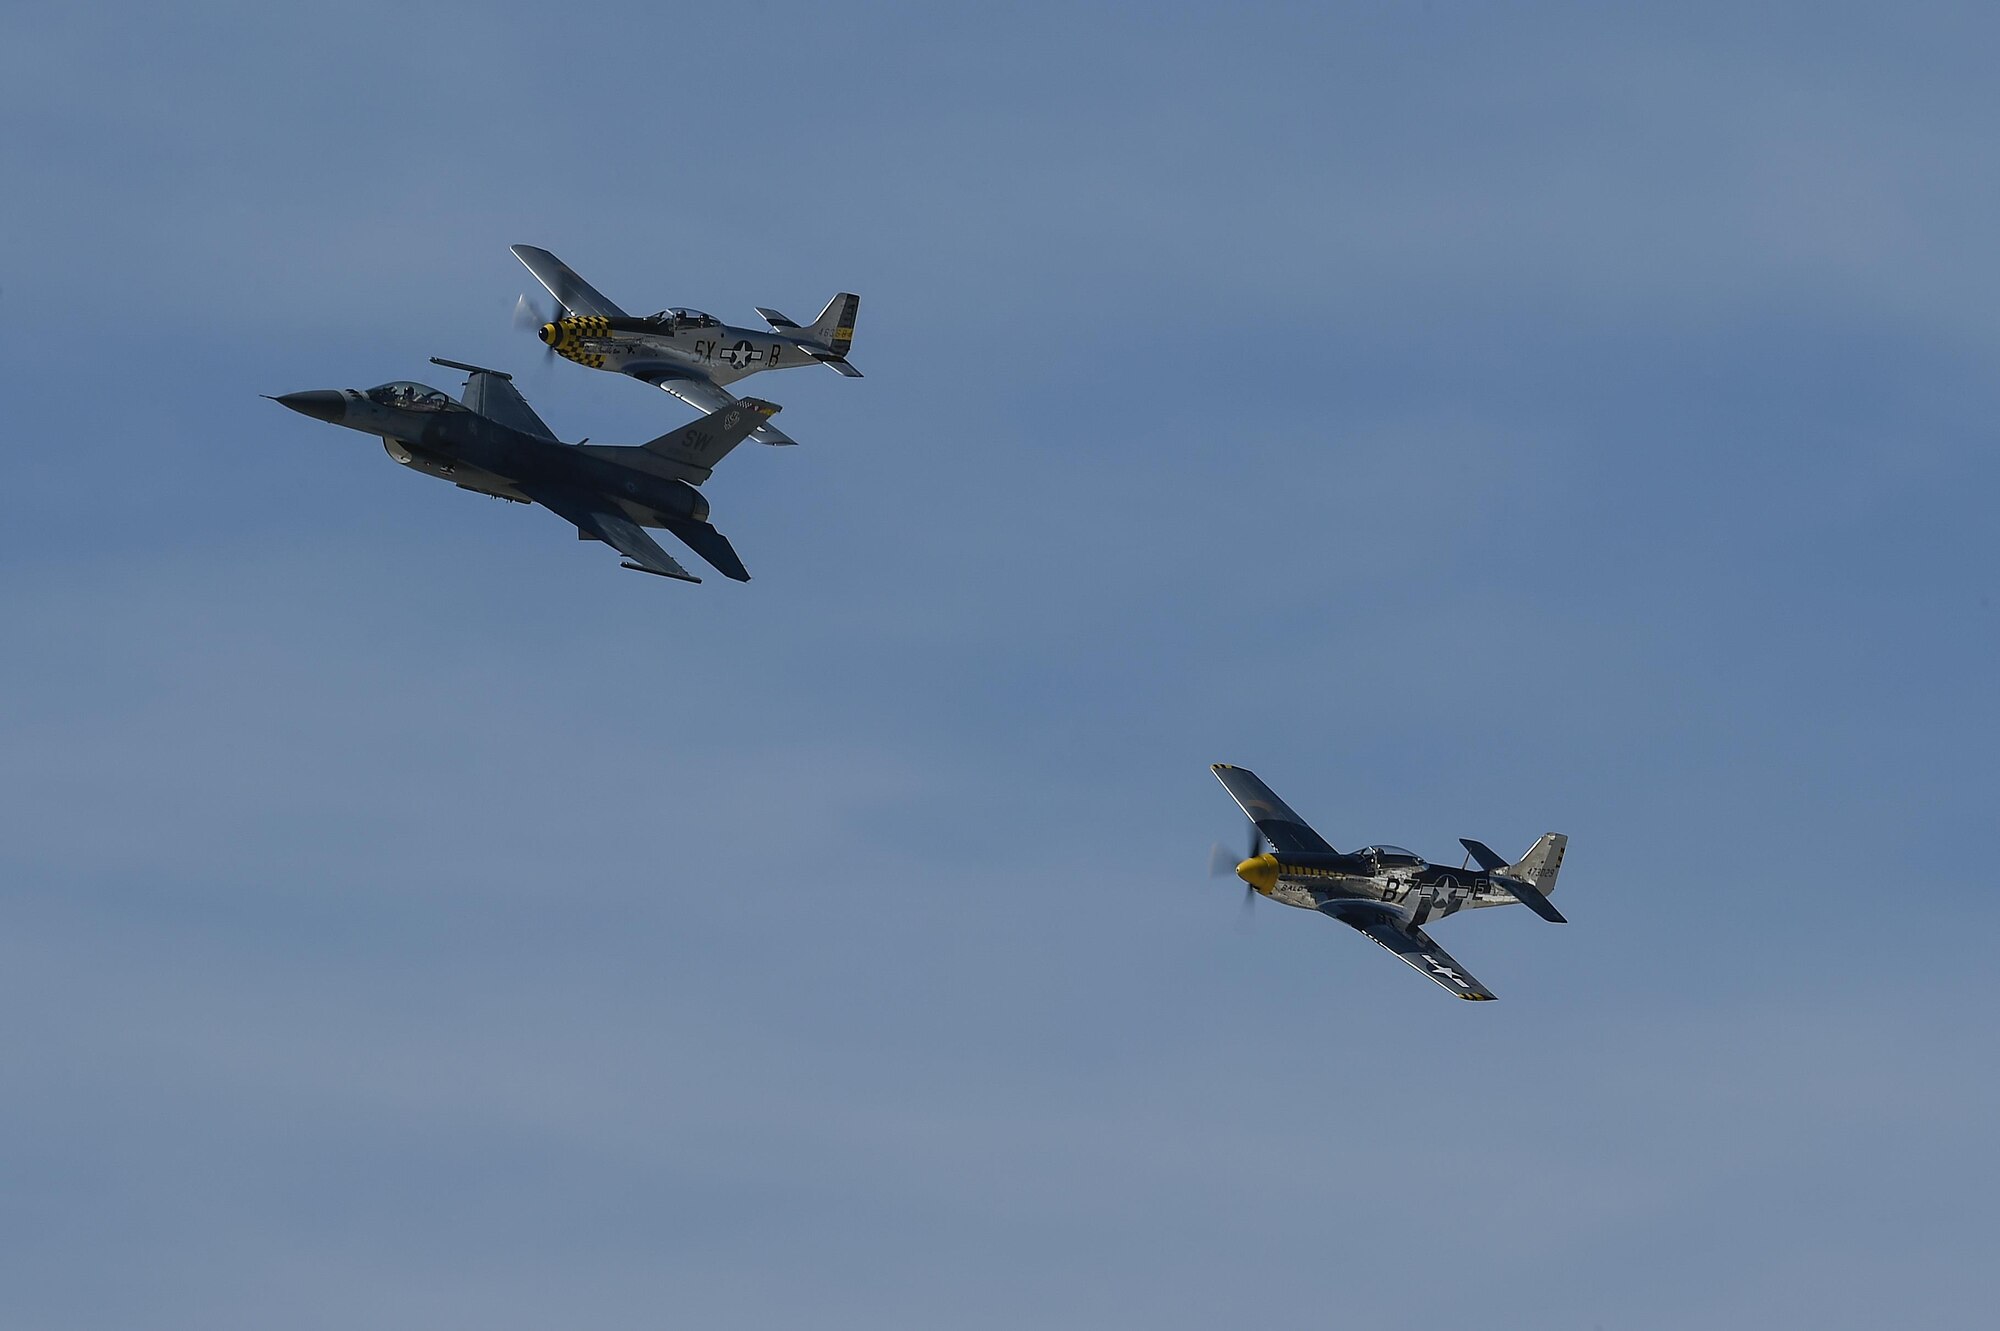 A U.S. Air Force F-16 Fighting Falcon and two P-51 Mustangs fly together during the 2017 Heritage Flight Training and Certification Course at Davis-Monthan Air Force Base, Ariz., Feb. 10, 2017. During the course, aircrews practice ground and flight training to enable civilian pilots of historic military aircraft and U.S. Air Force pilots of current fighter aircraft to fly safely in formations together. (U.S. Air Force photo by Senior Airman Chris Drzazgowski)